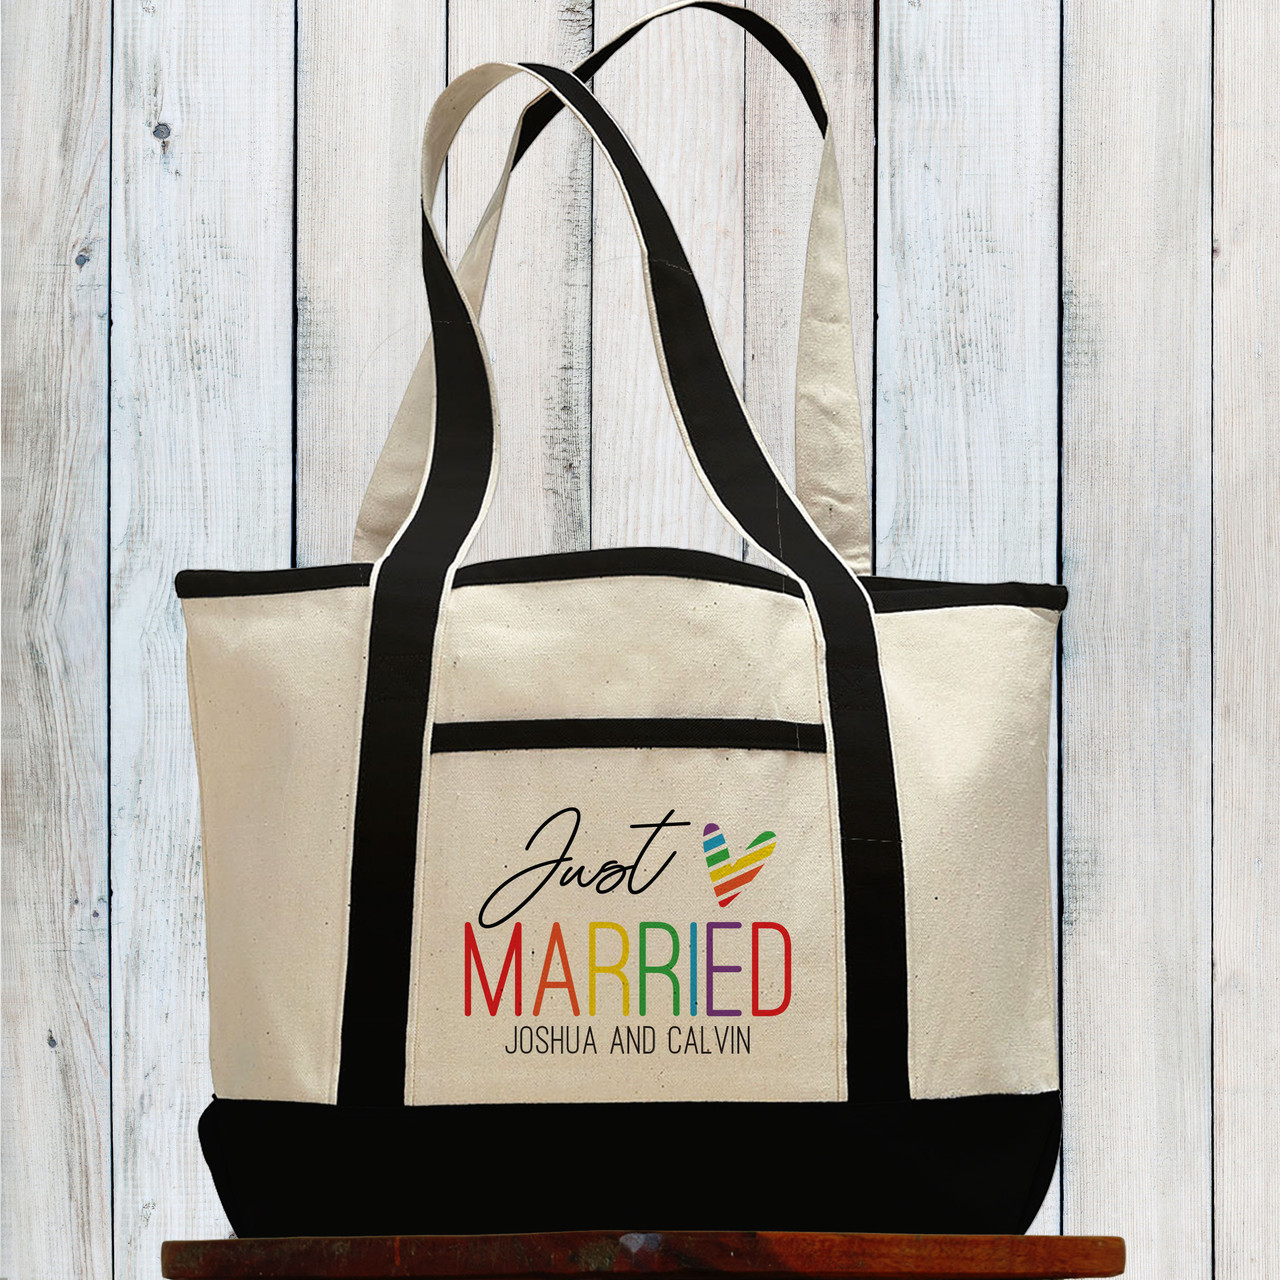 Just Married Personalized Beach Tote Bag for Same Sex Couple photo